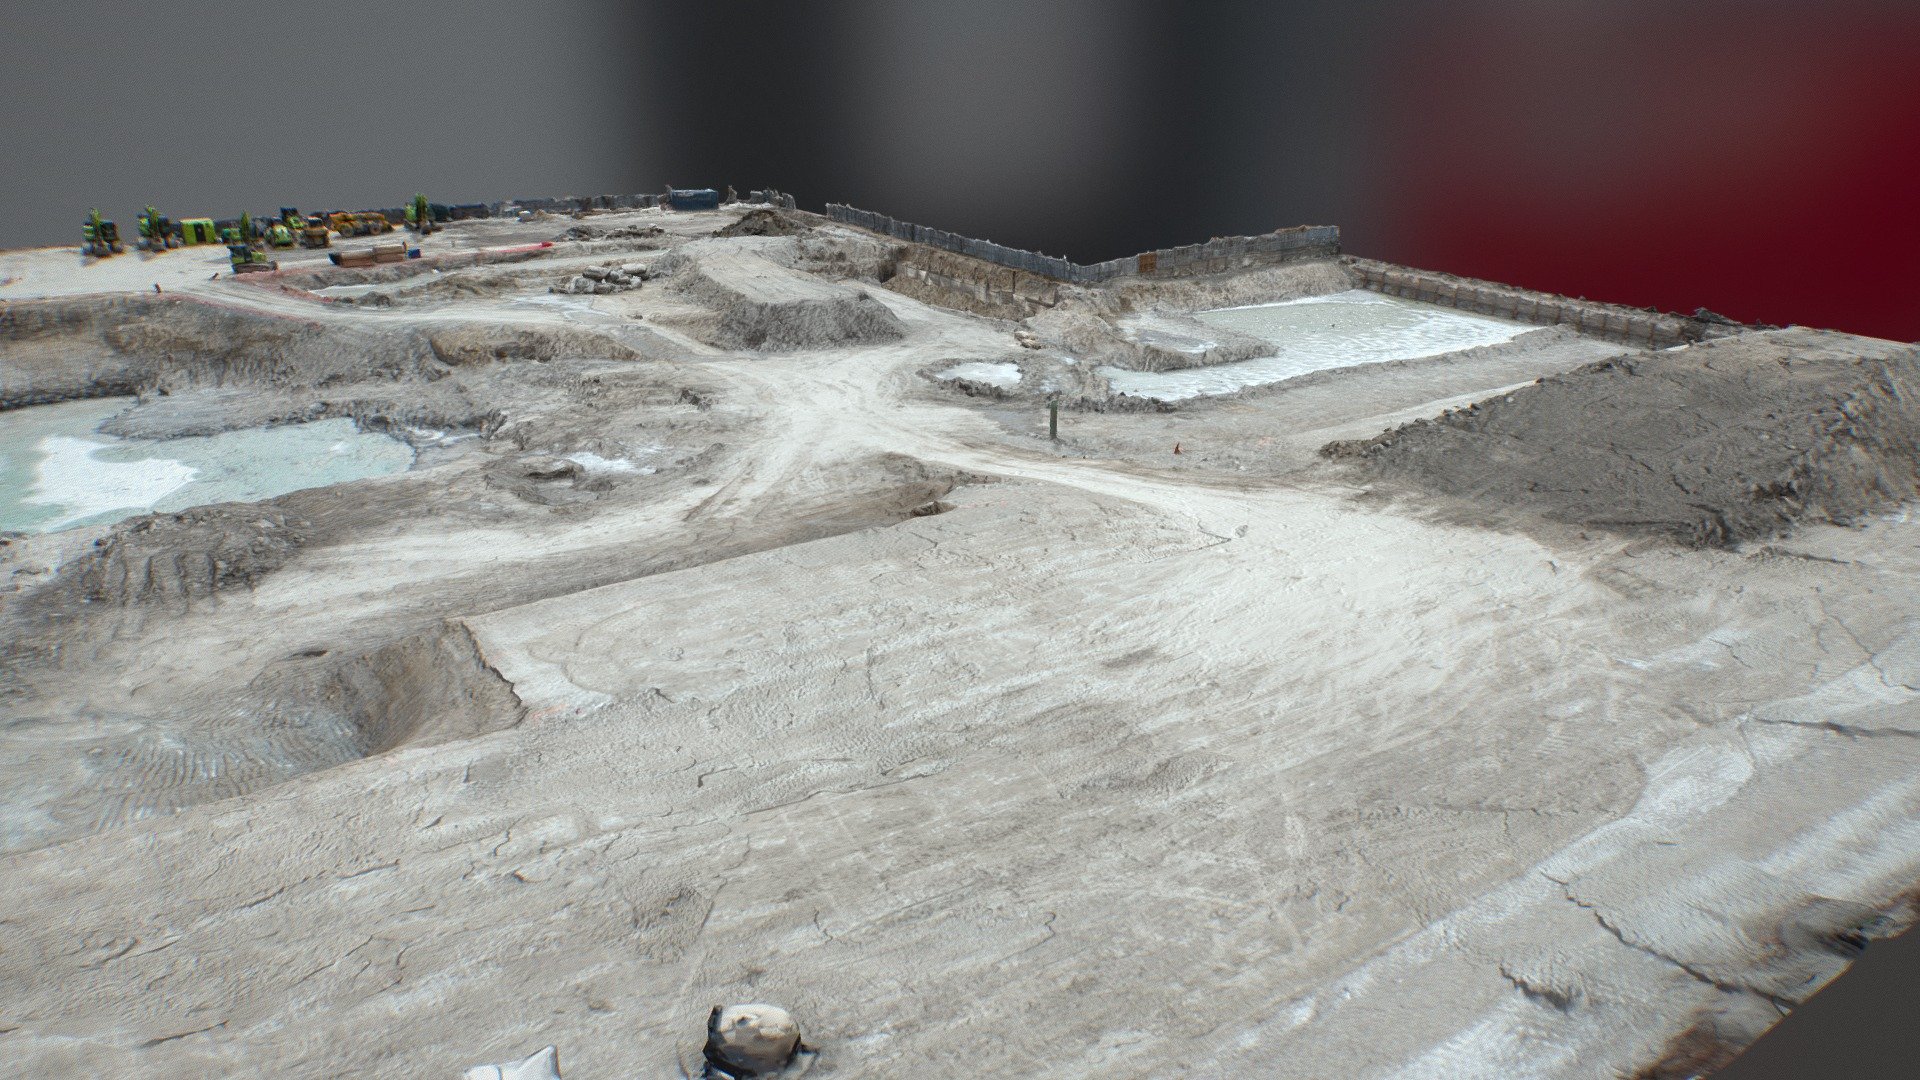 Round 2 Scan of the construction site down on Birmingham st. Etobicoke
Scanned this area with a Mavic Air 2 on December 19th, 2020
~900 photos shot in 48 Megapixel Raw
Color processed RAW into RC 
Touched up in Medium, Texture Baked using Substance Designer
Processed to 100k Low Poly for Sketchfab

Previous Round in Scan : https://skfb.ly/6XFAR - Construction Site - Birmingham St. [Dec 19,2020] - 3D model by StudioNexus (@cynex) 3d model